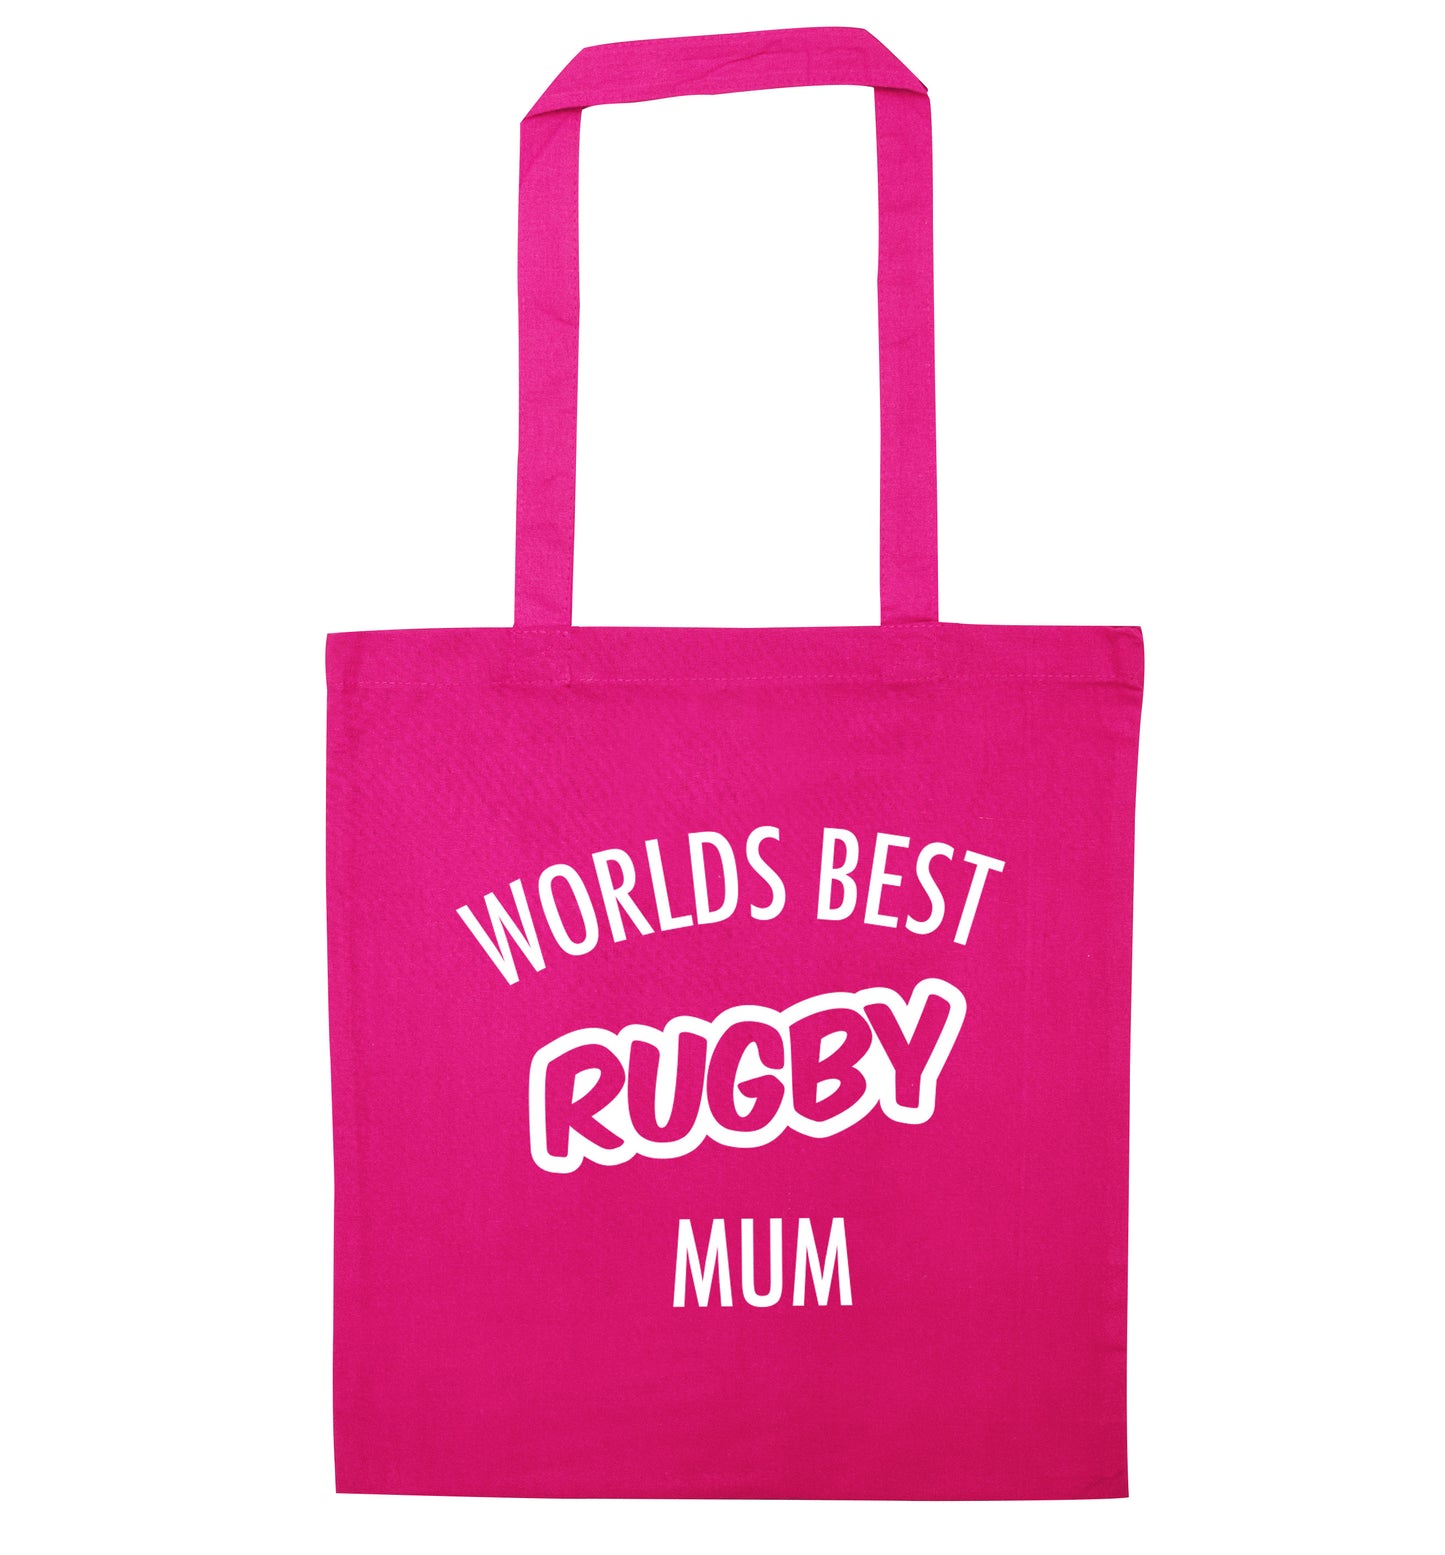 Worlds best rugby mum pink tote bag